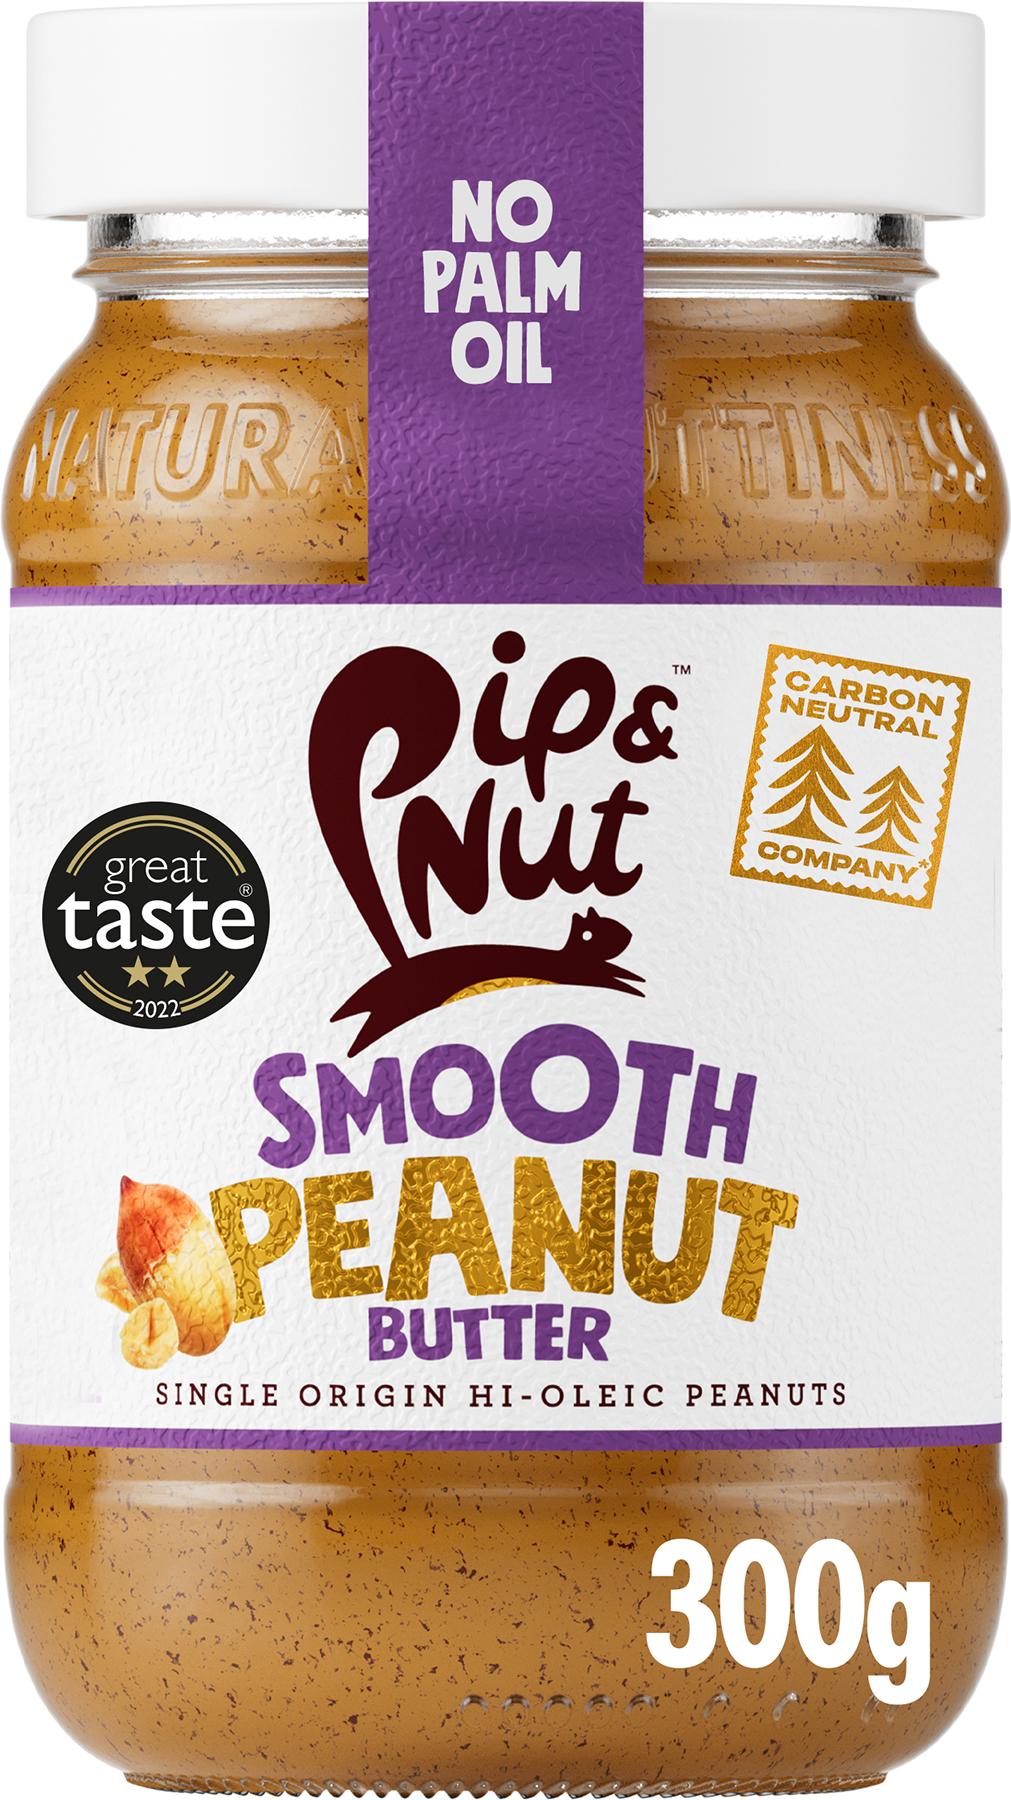 PipandNut Nut Smooth Peanut Butter (300g)